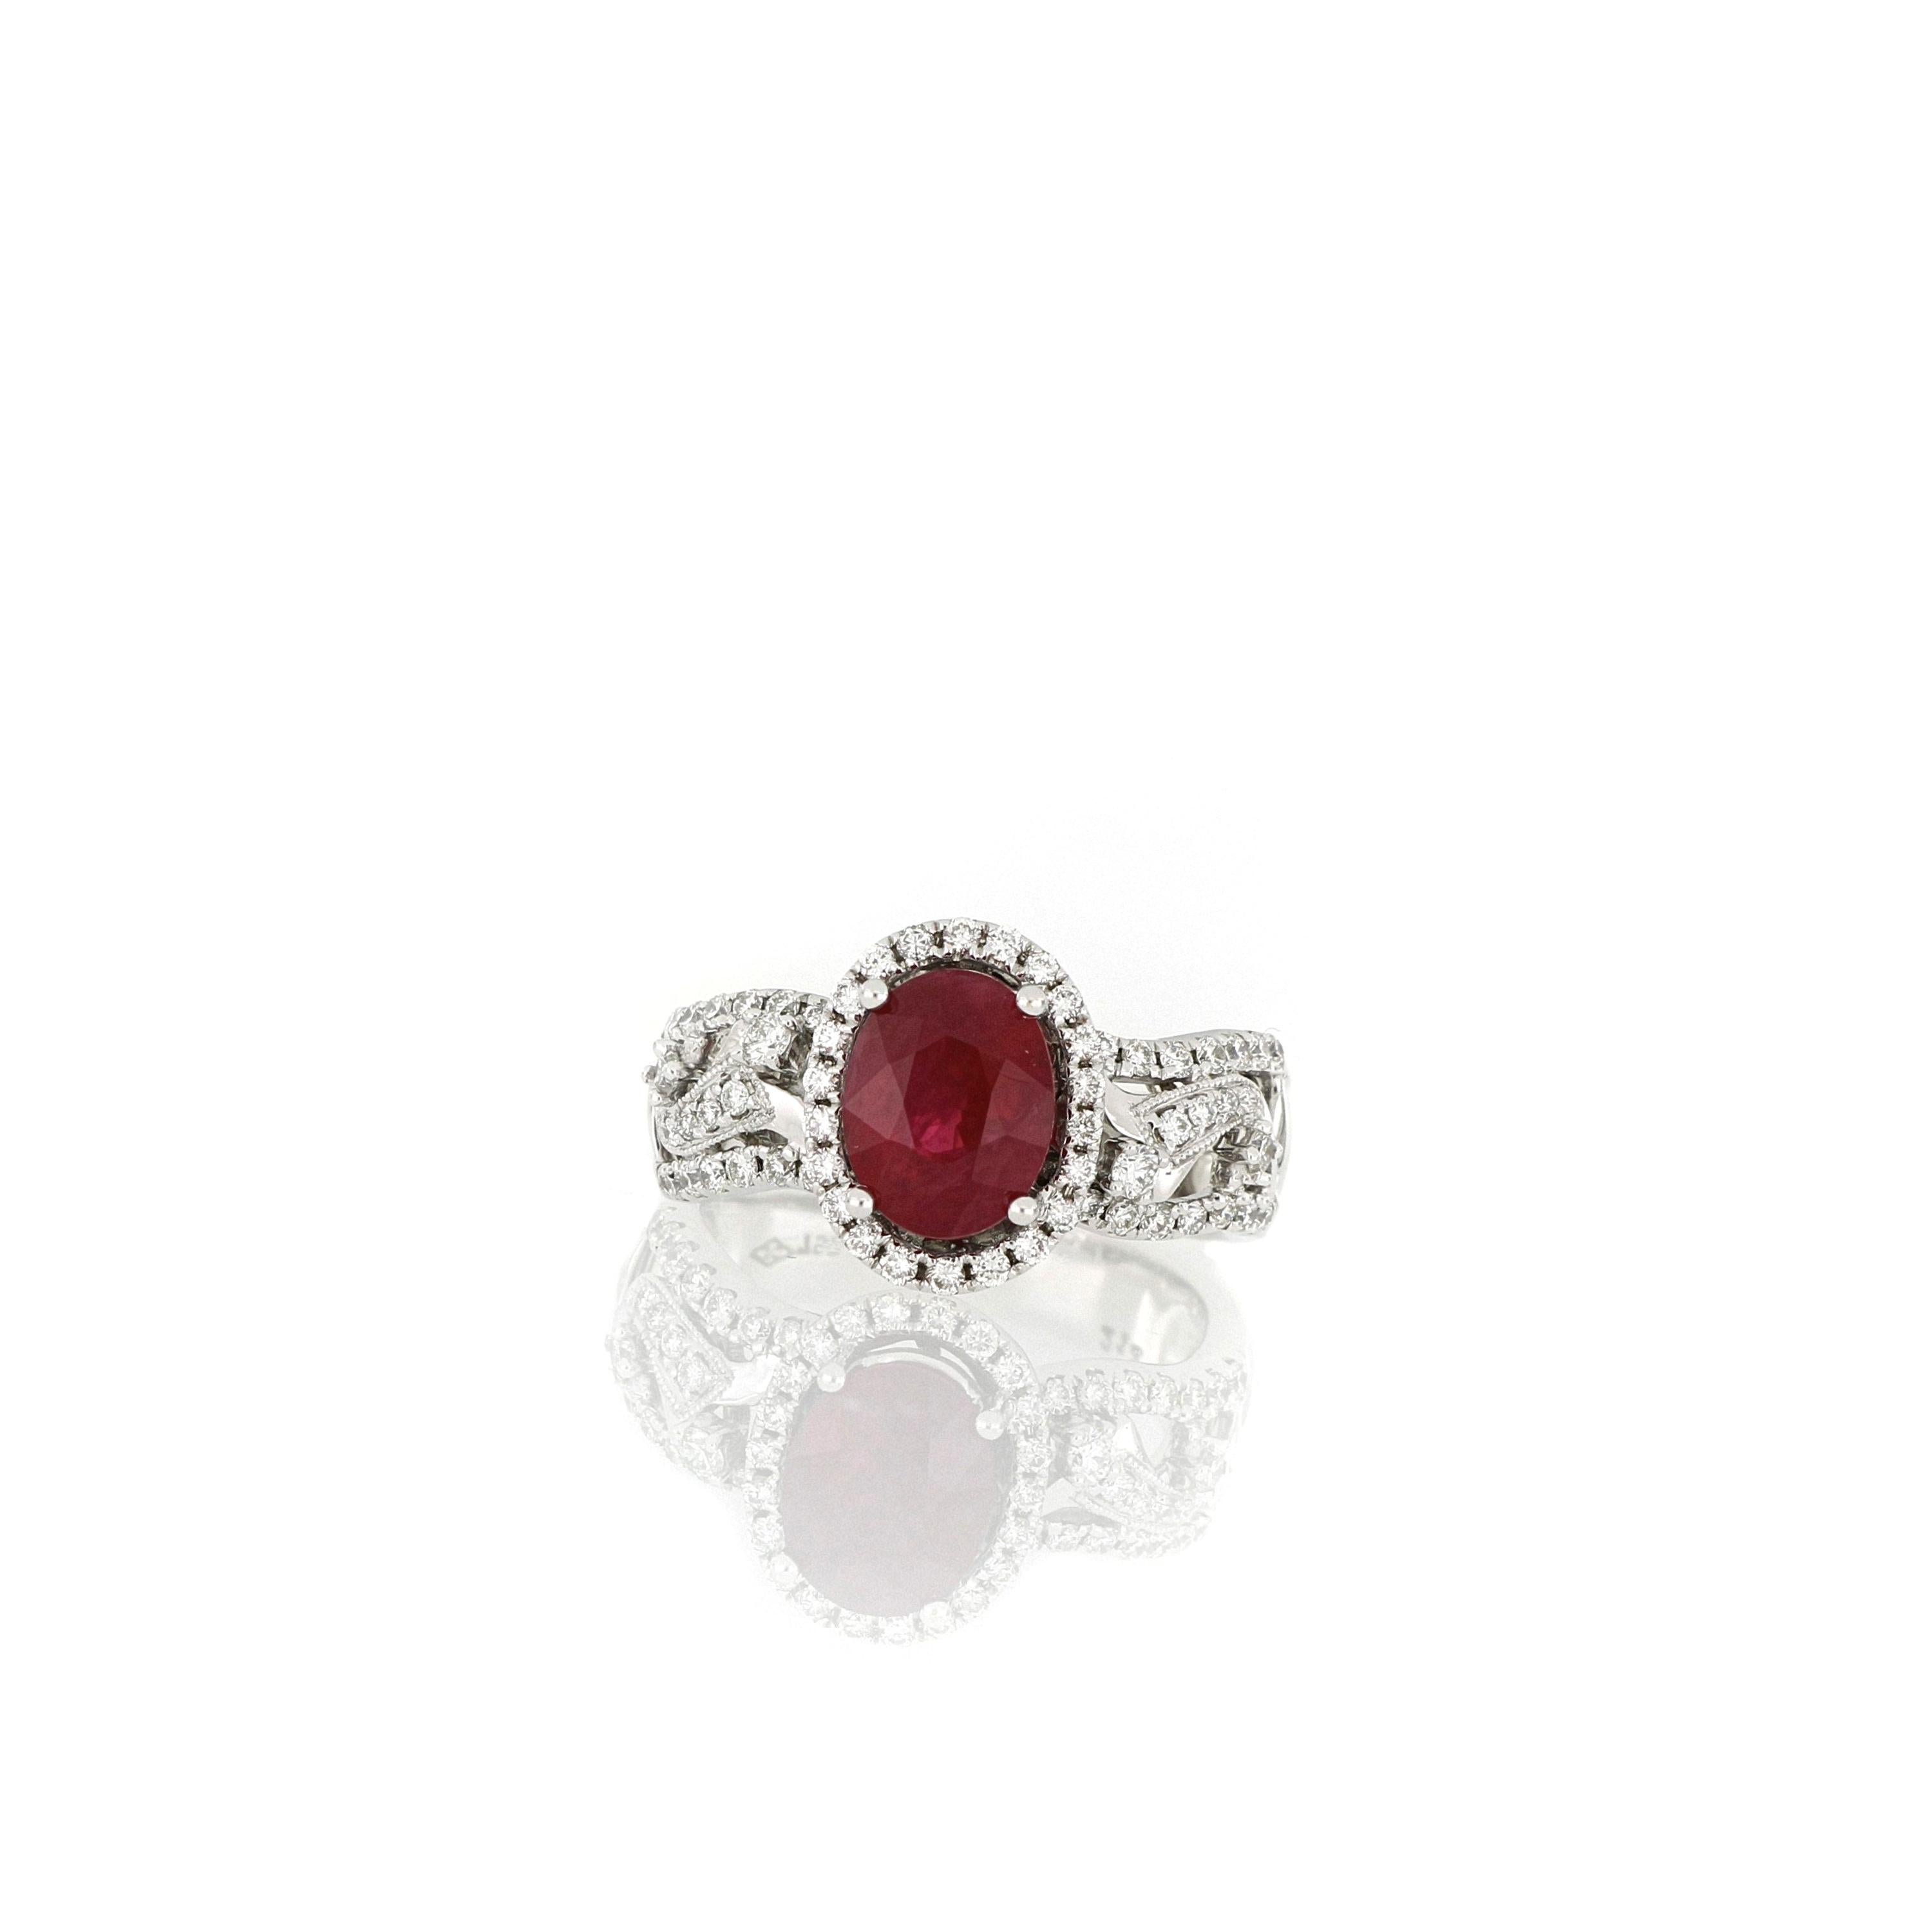 A fabulous ring, set with a natural oval brilliant cut ruby of bright red colour weighing 2.12cts, sourced in Burma, decorated with brilliant cut diamonds extending to the shoulders totaling 0.53cts, mounted in 18 karat white gold.
O’Che 1867 is